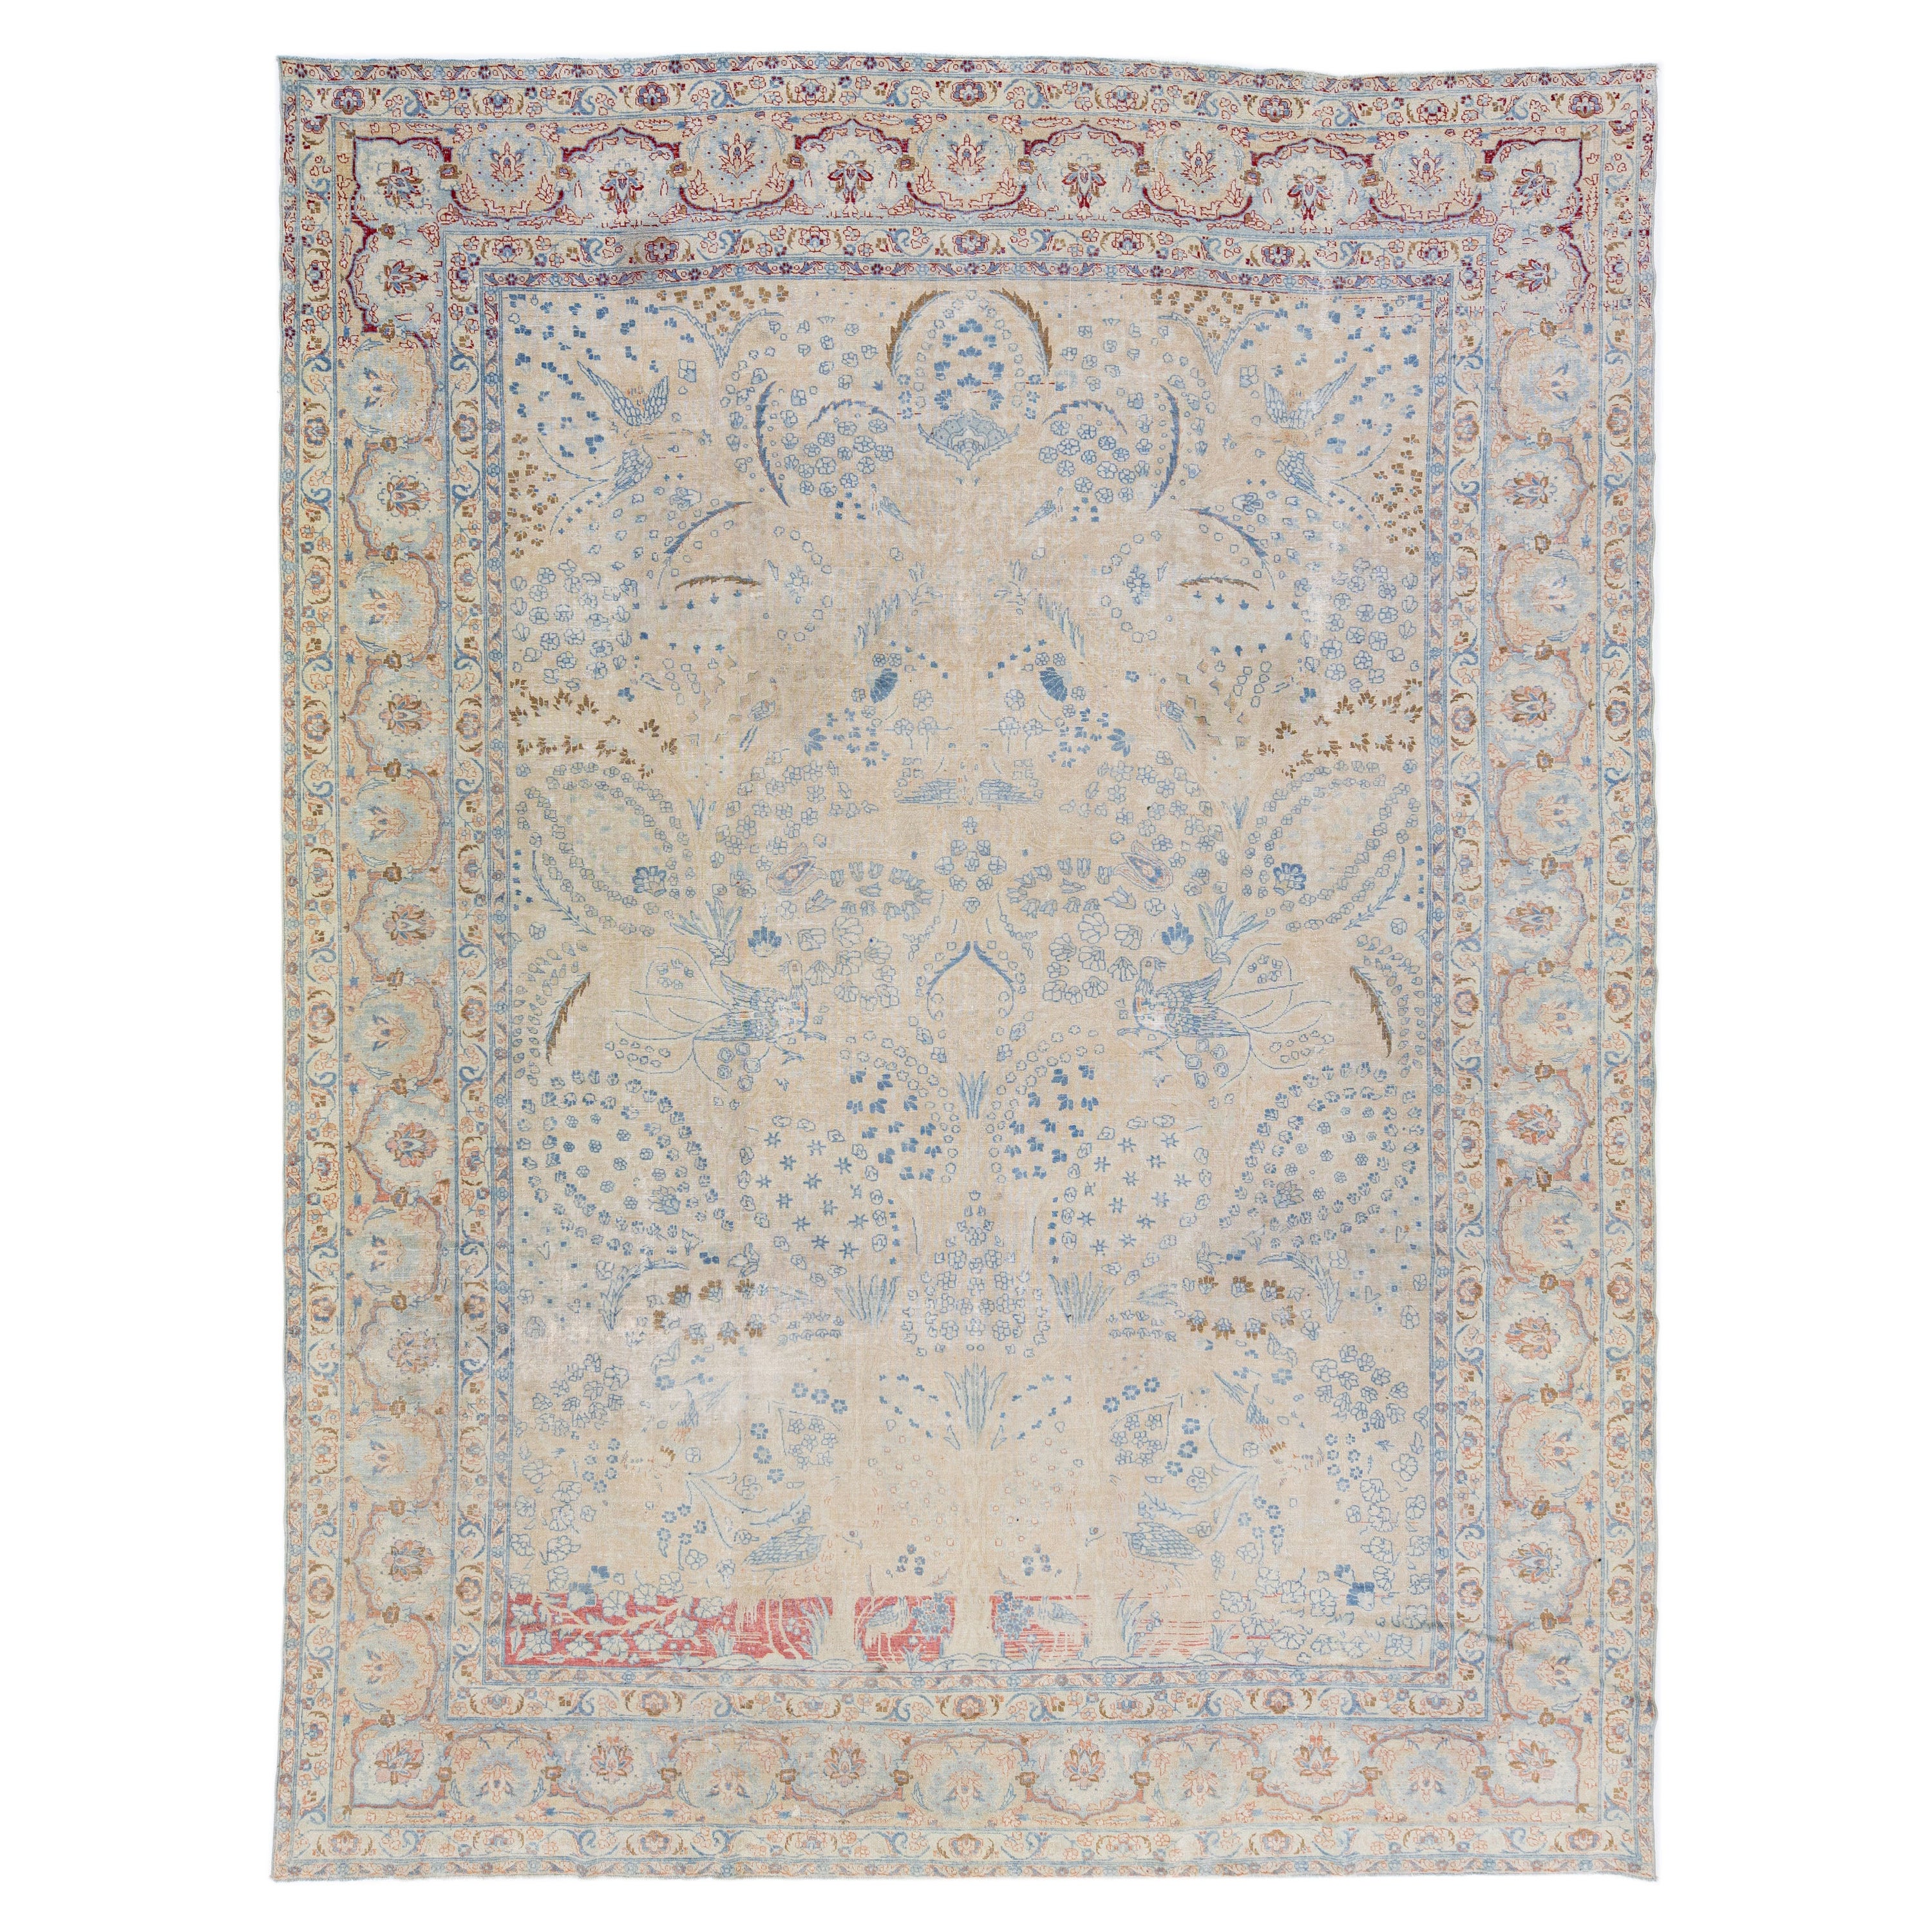 1920s Antique Persian Tabriz Beige Handmade Wool Rug with Allover Motif For Sale